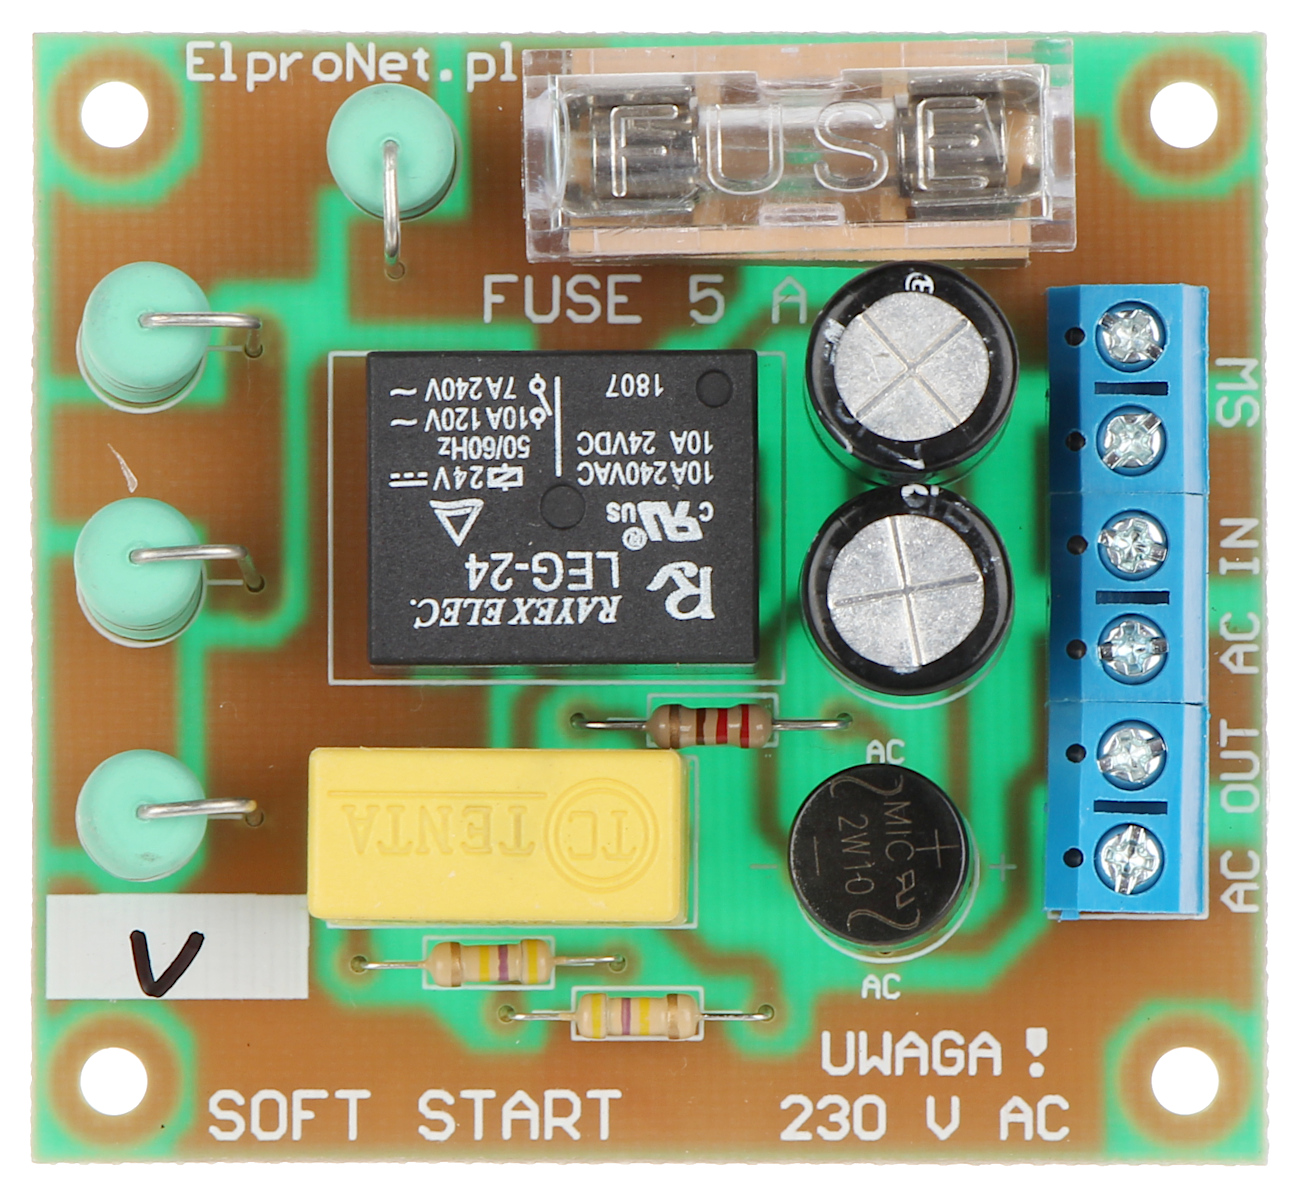 Circuit for Soft-Start Module